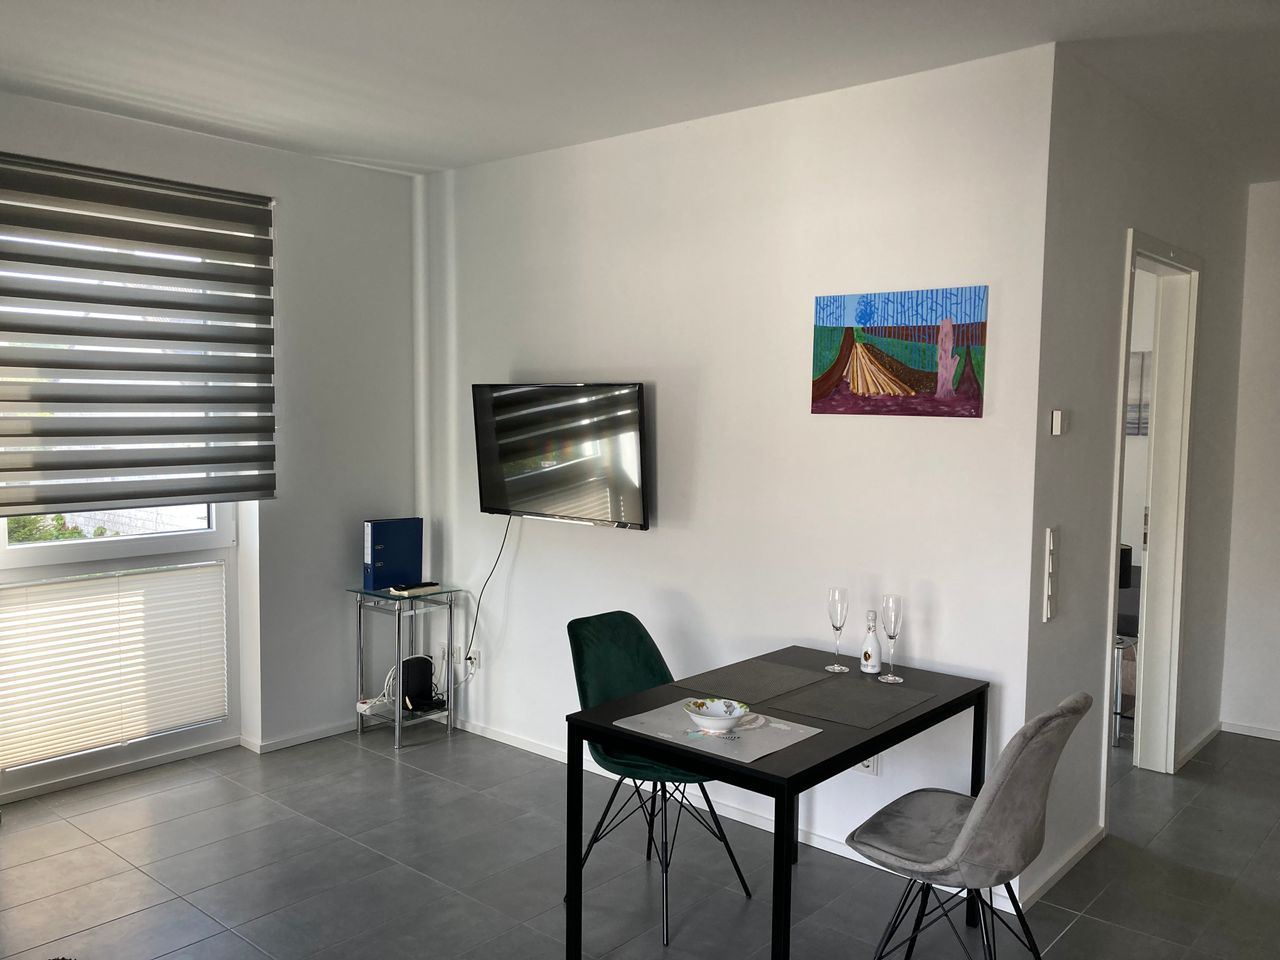 2 room-modern 2020s apartment in Cologne-Lövenich (West) close to S-Bahn station